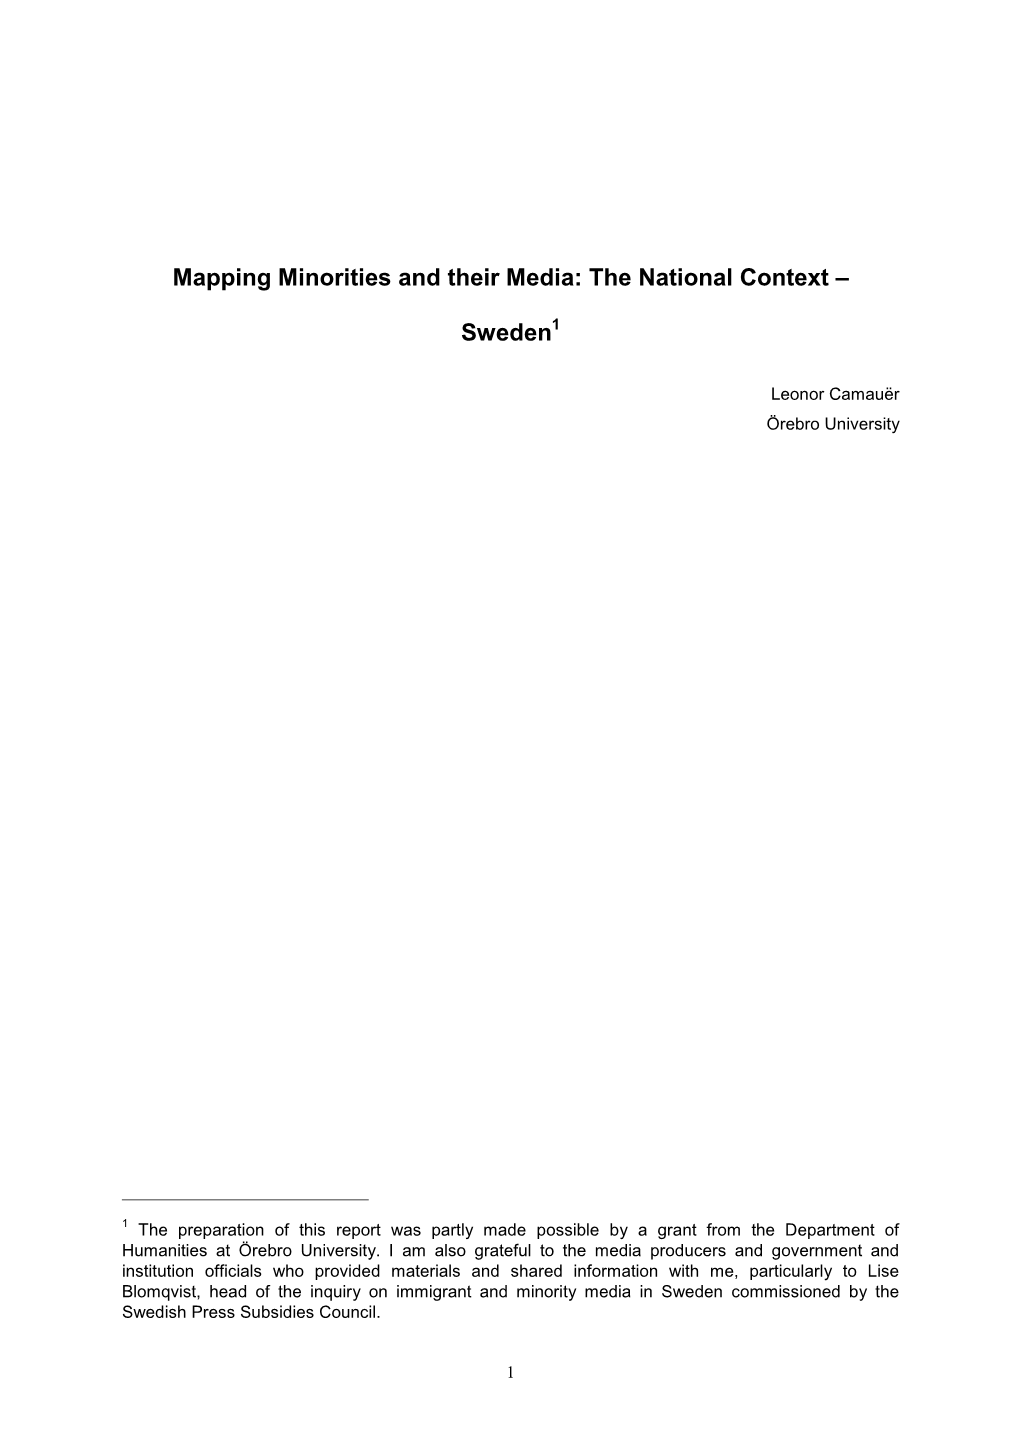 Mapping Minorities and Their Media: the National Context – Sweden